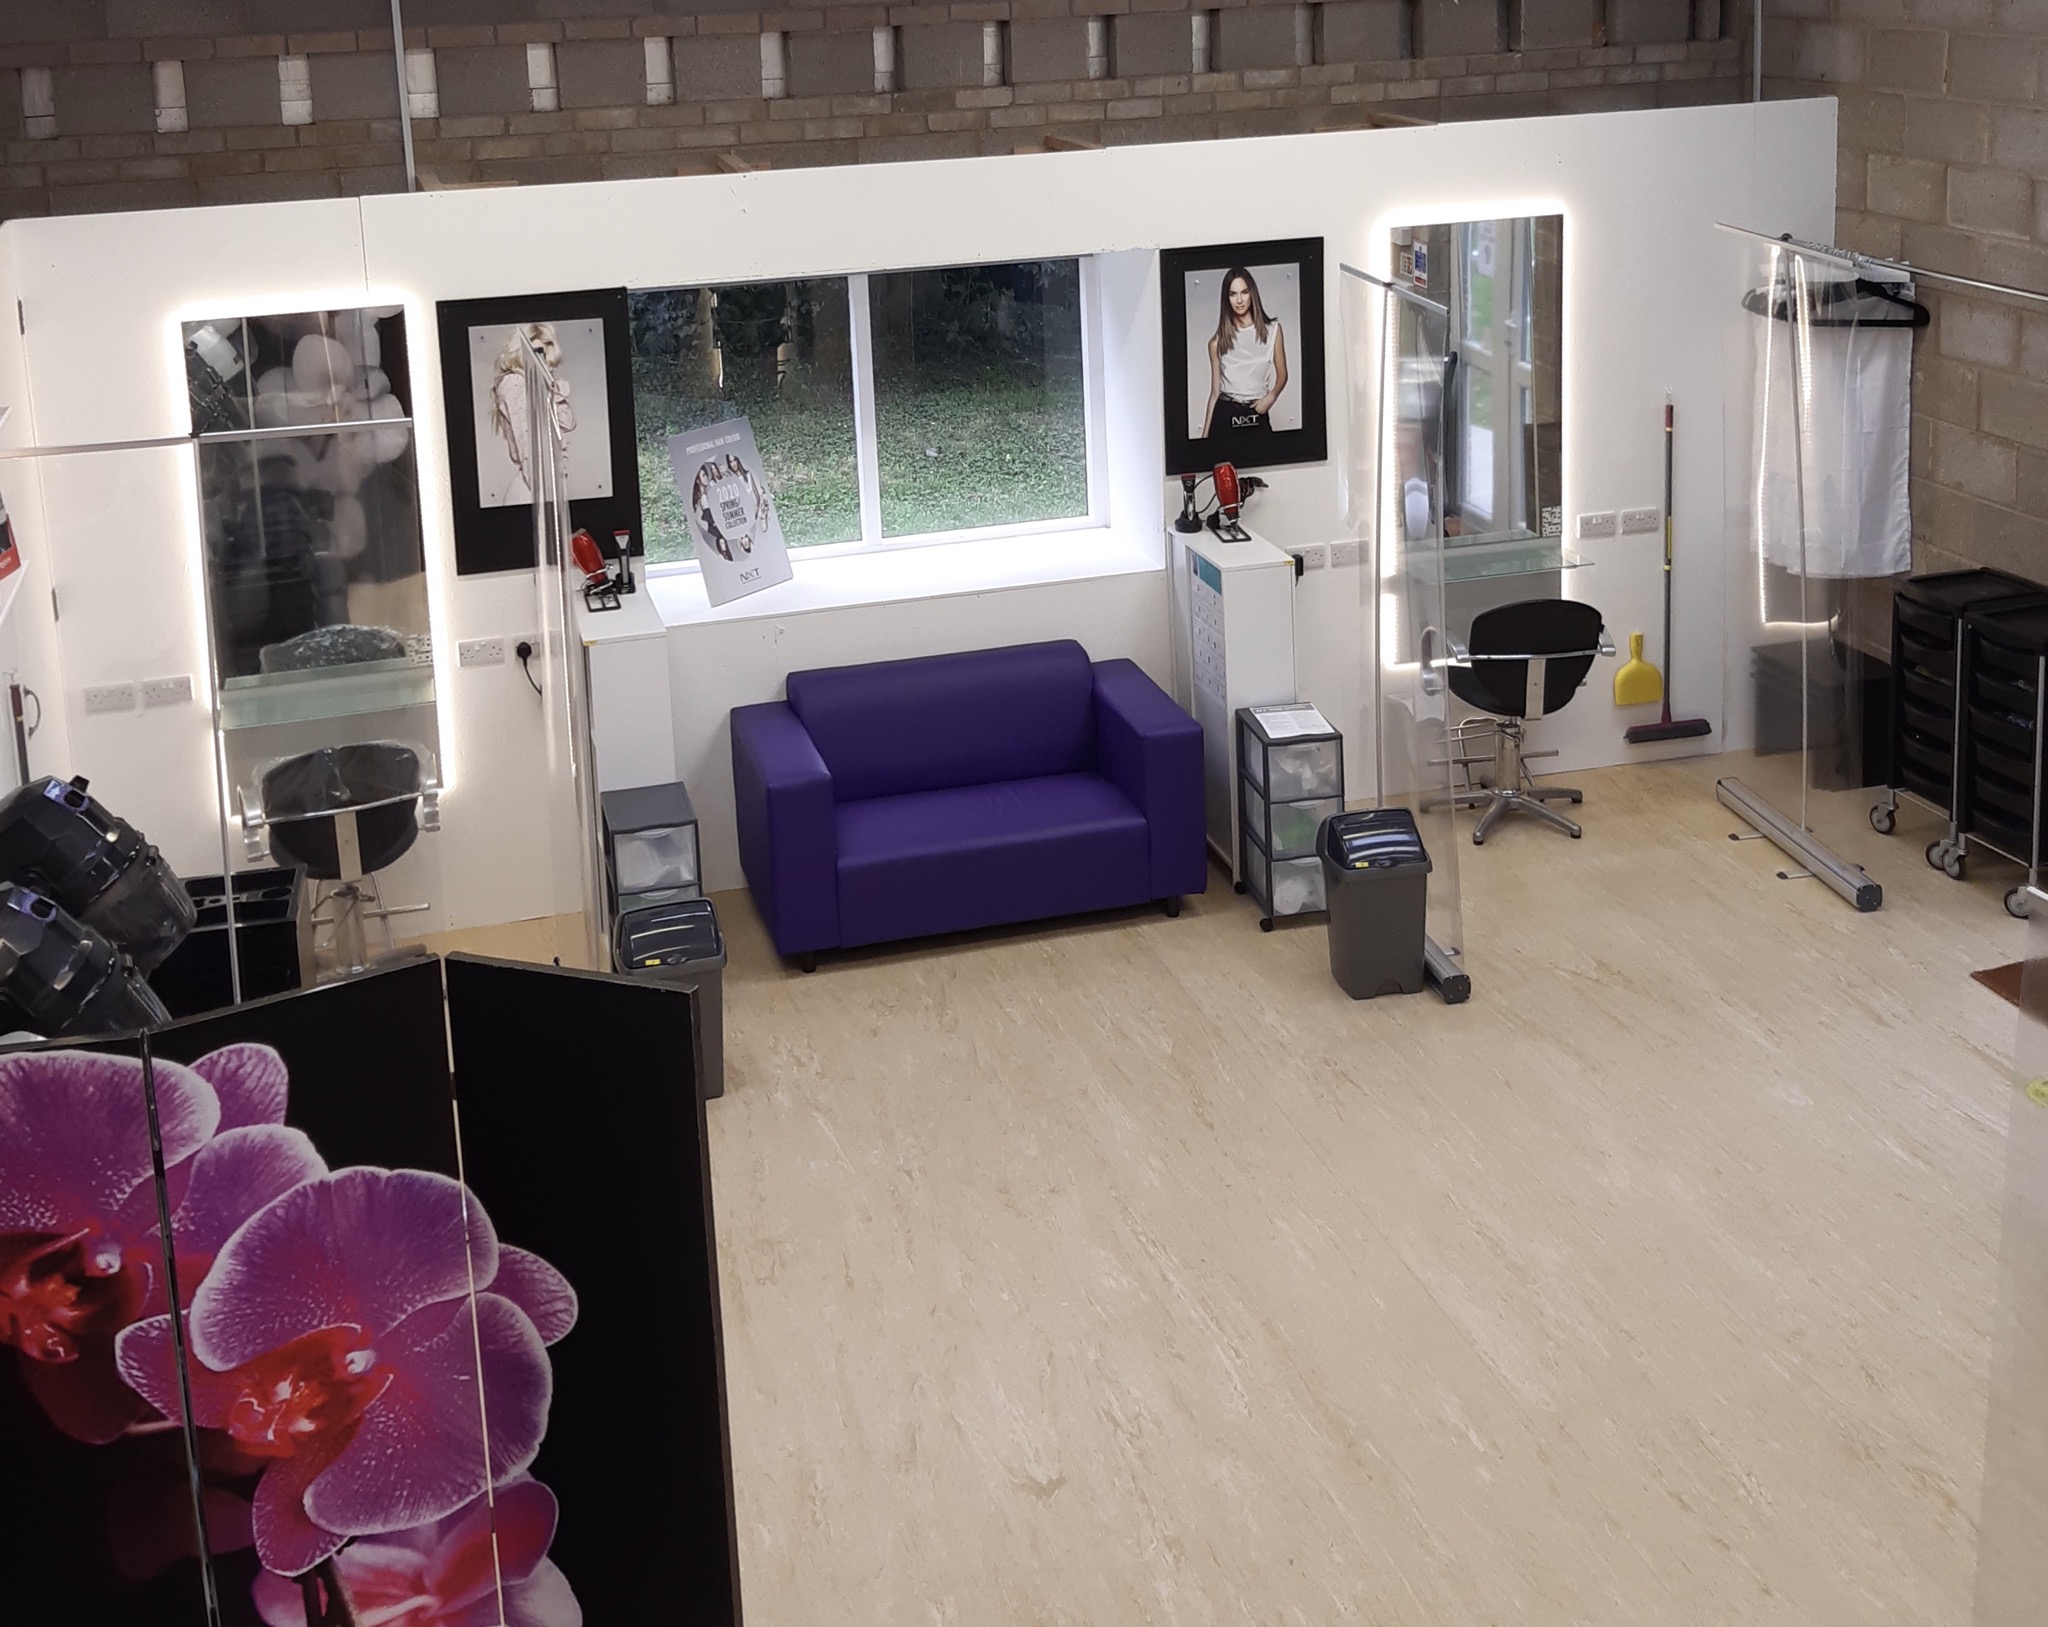 FEATURED | Village hairdressers relocates to continue providing a vital service